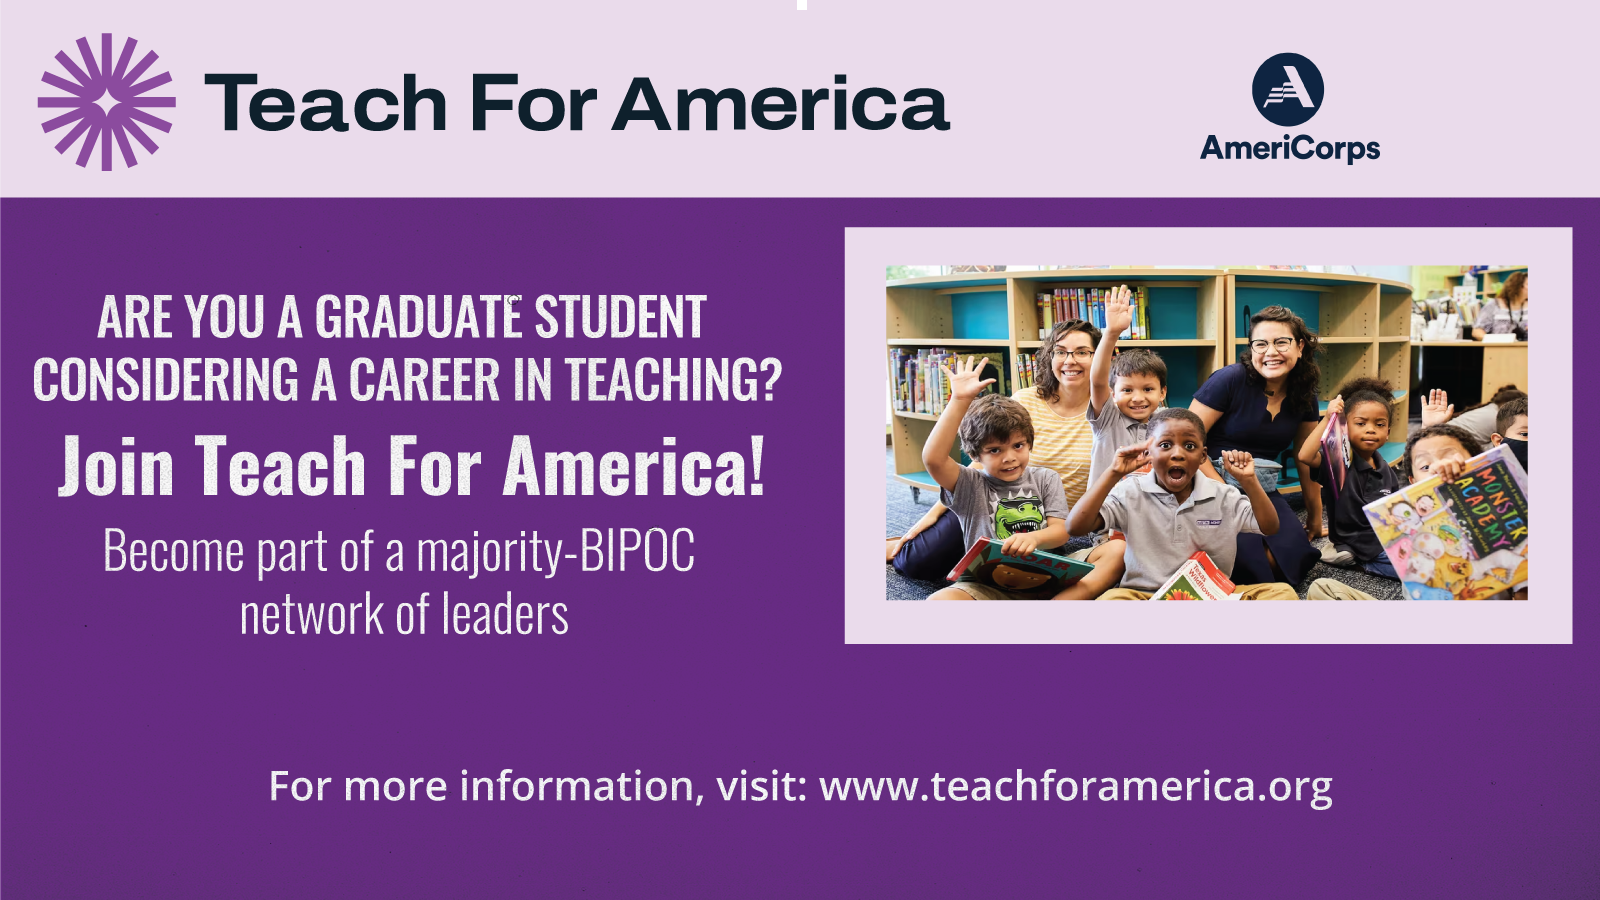 Are you a graduate student considering a career in teaching?  Join Teach for America.  Become part of a majority-BIPOC network of leaders. Check out their leadership corps program here in the Midwest & around the country.